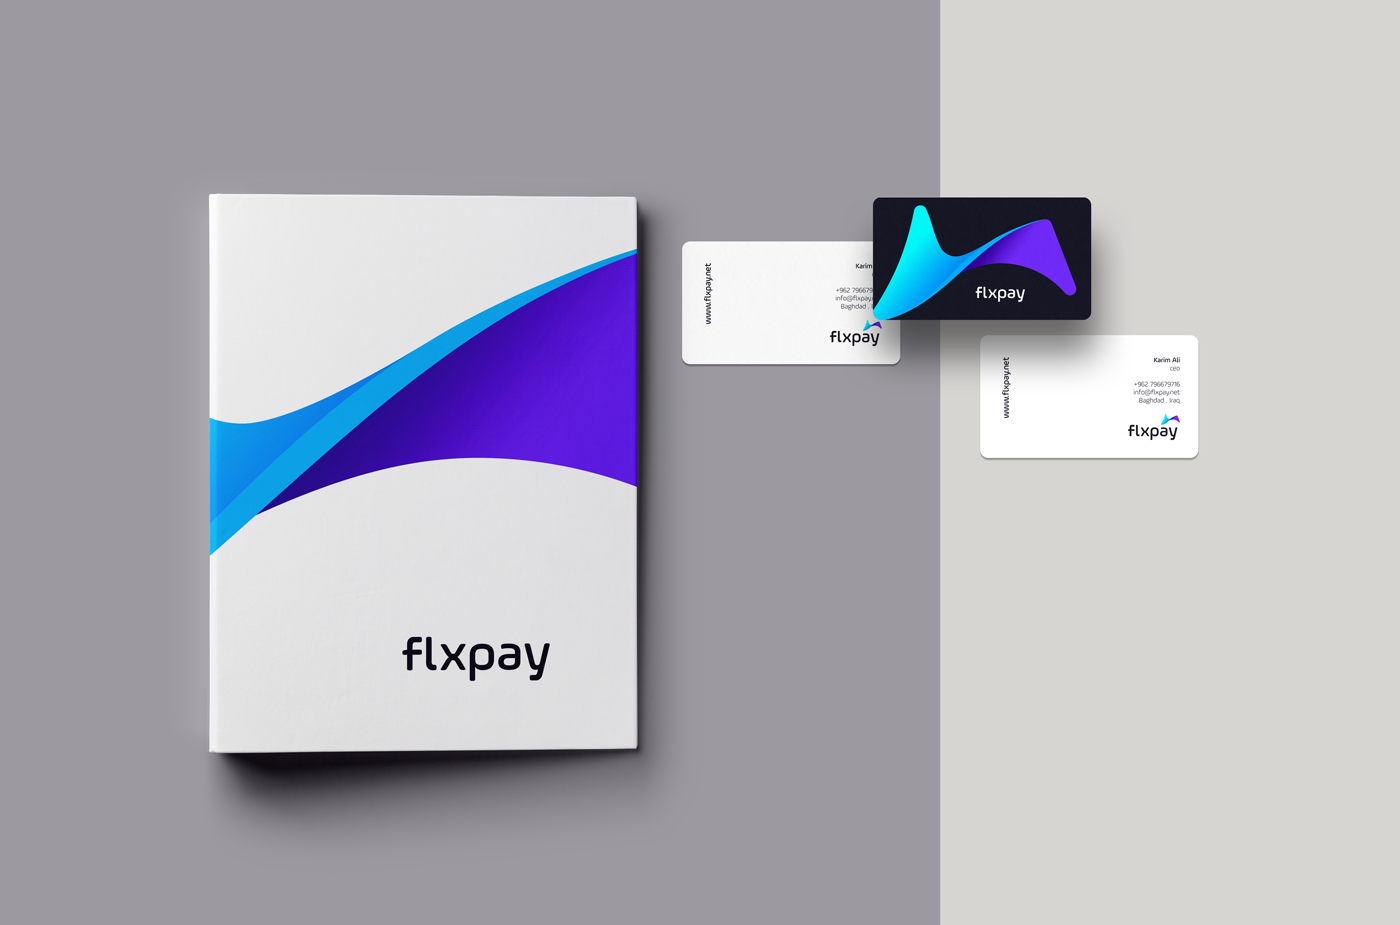 Flxpay Technology logo identity software identidade visual brand Pay Startup Fintech